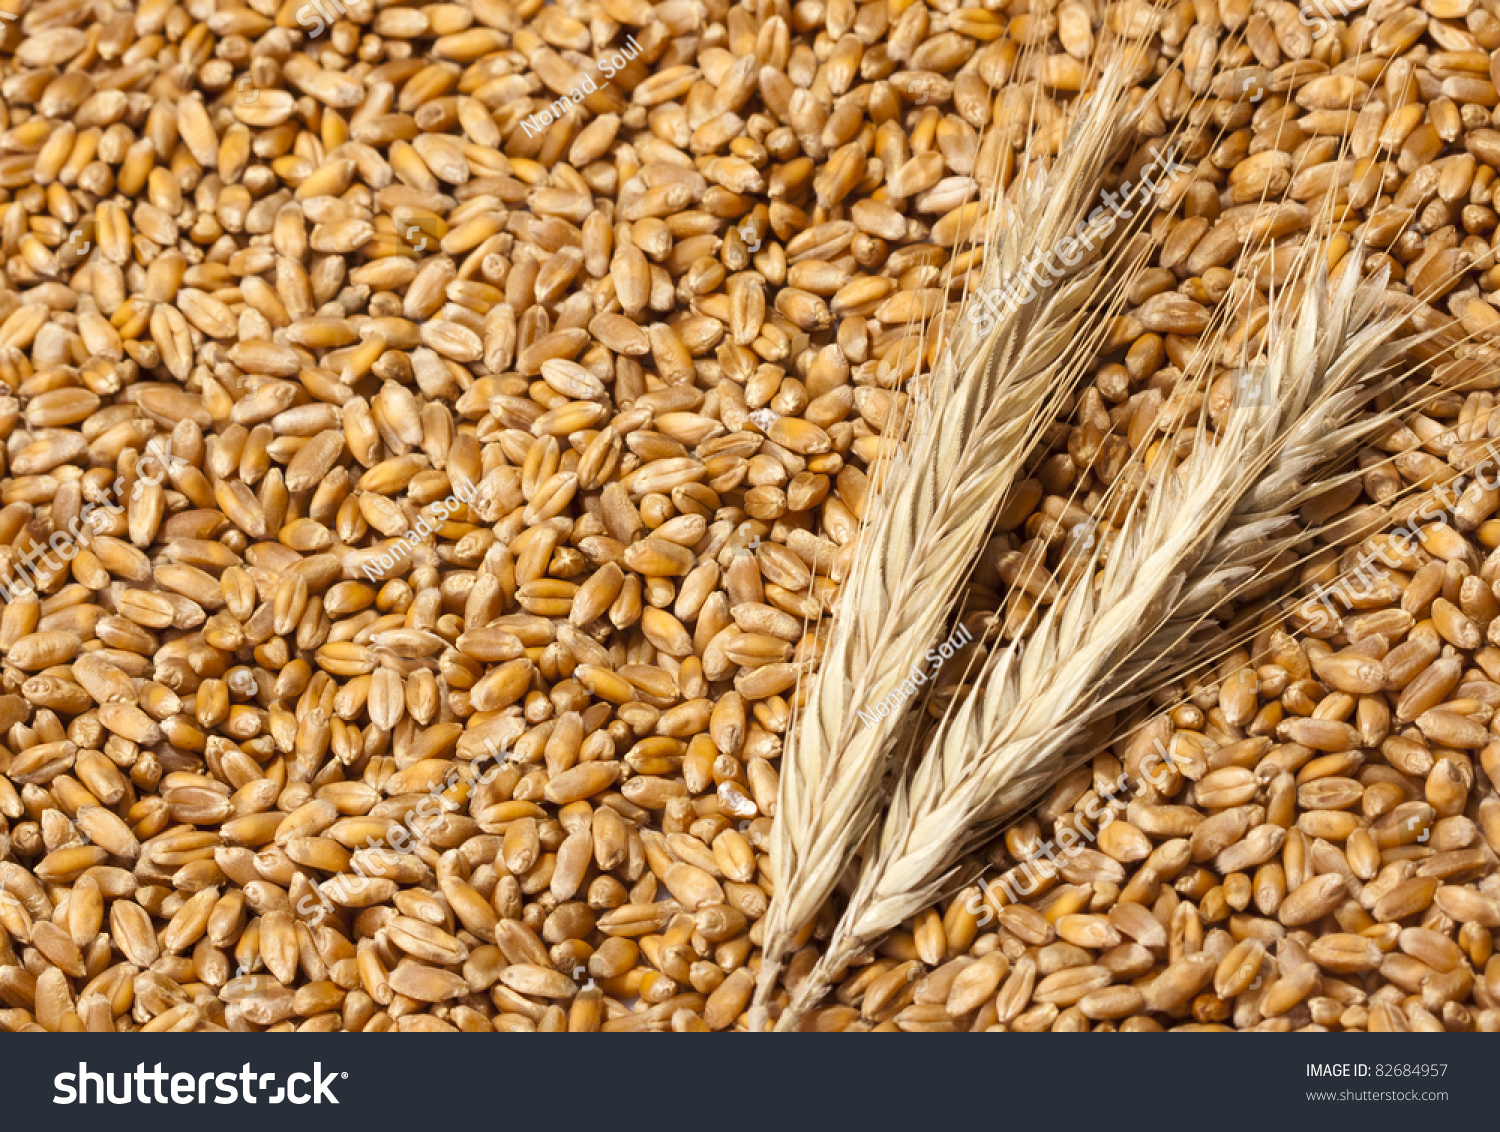 Close-up view of wheat ears with seeds #82684957